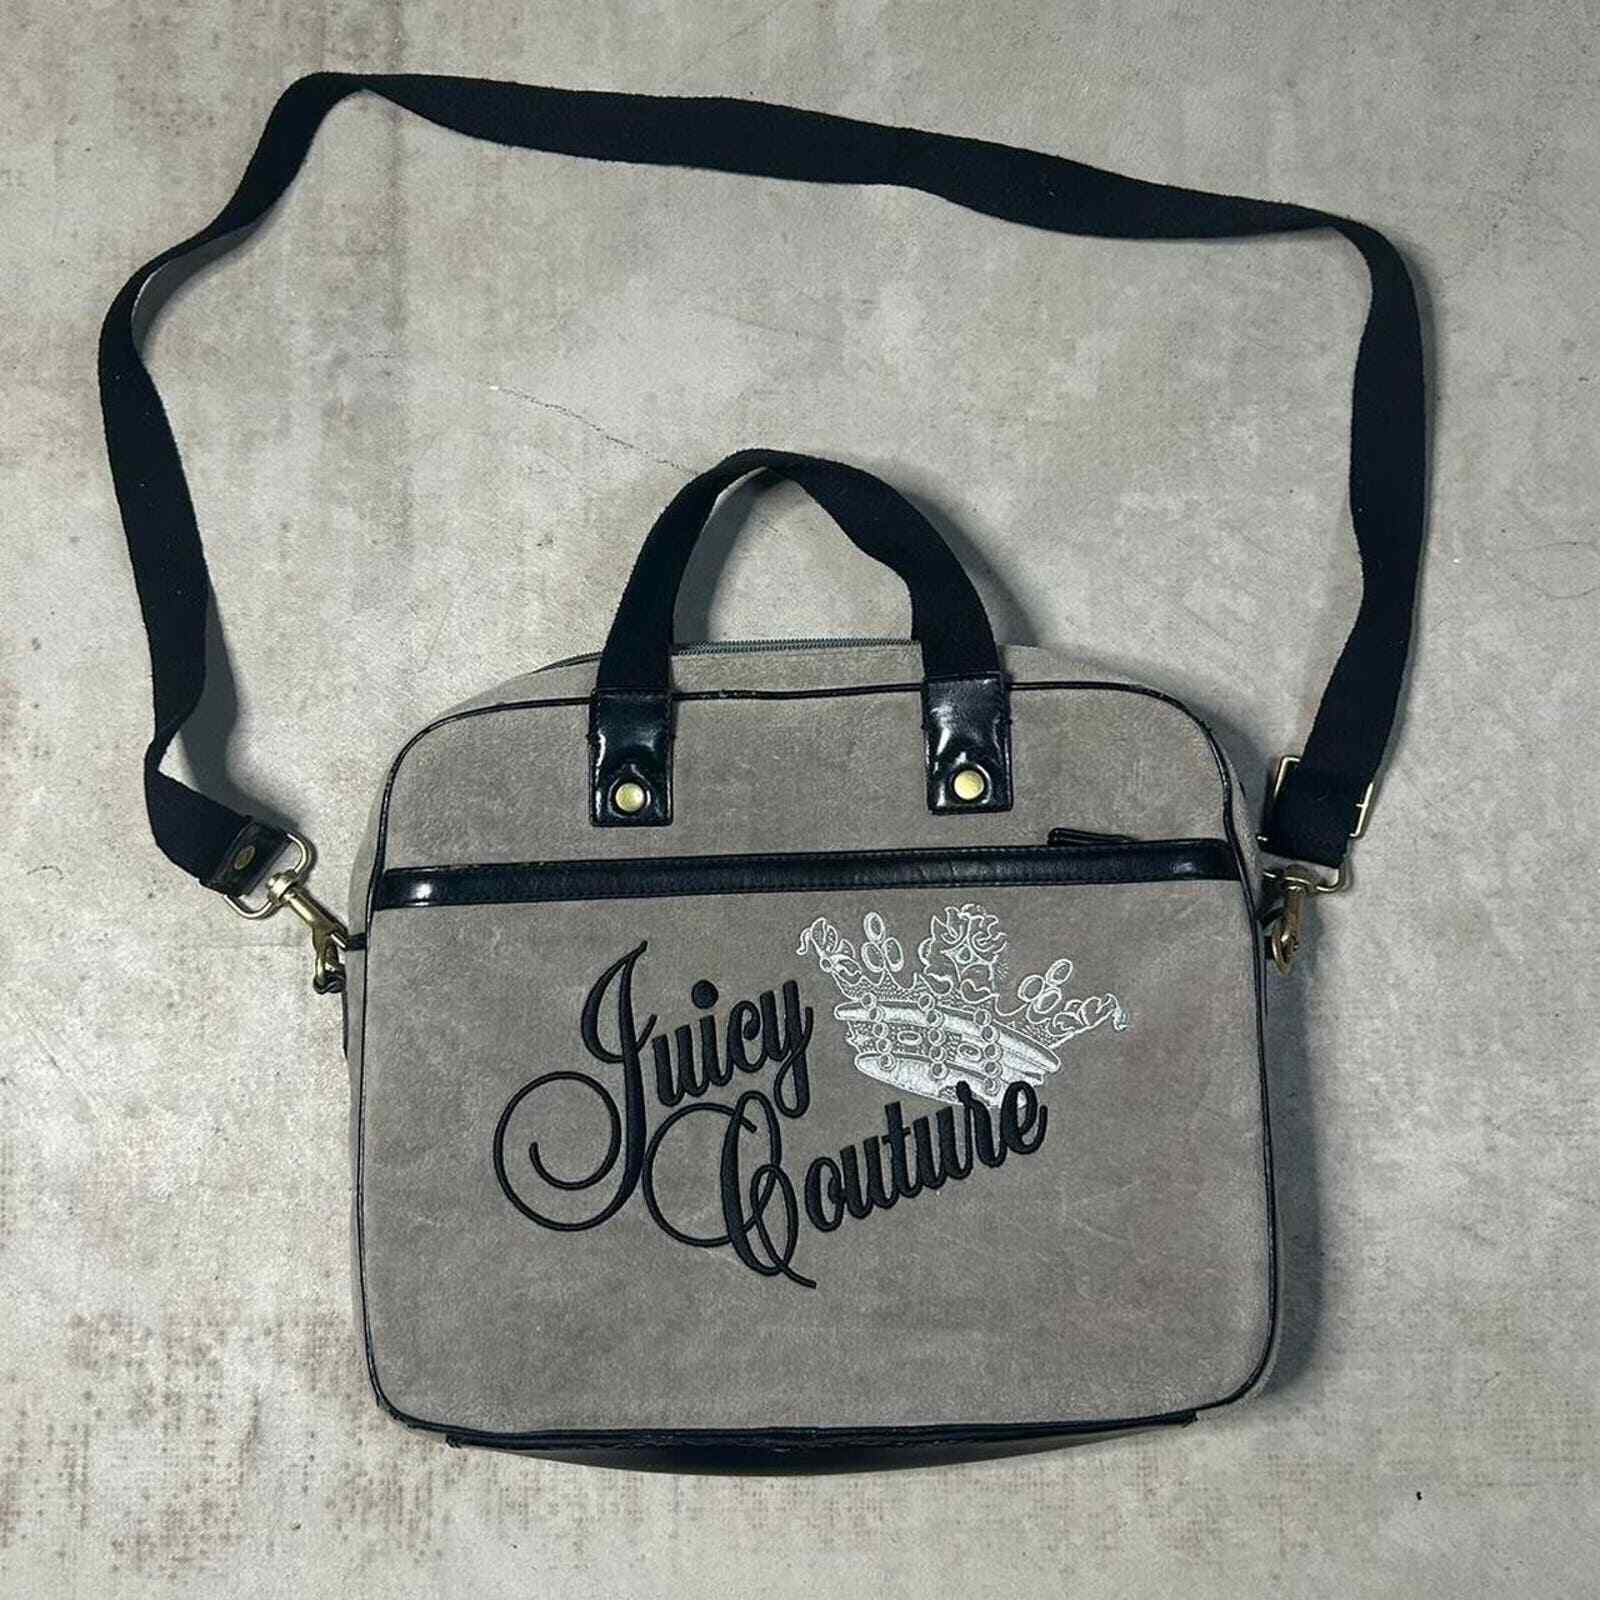 Juicy couture laptop bag would